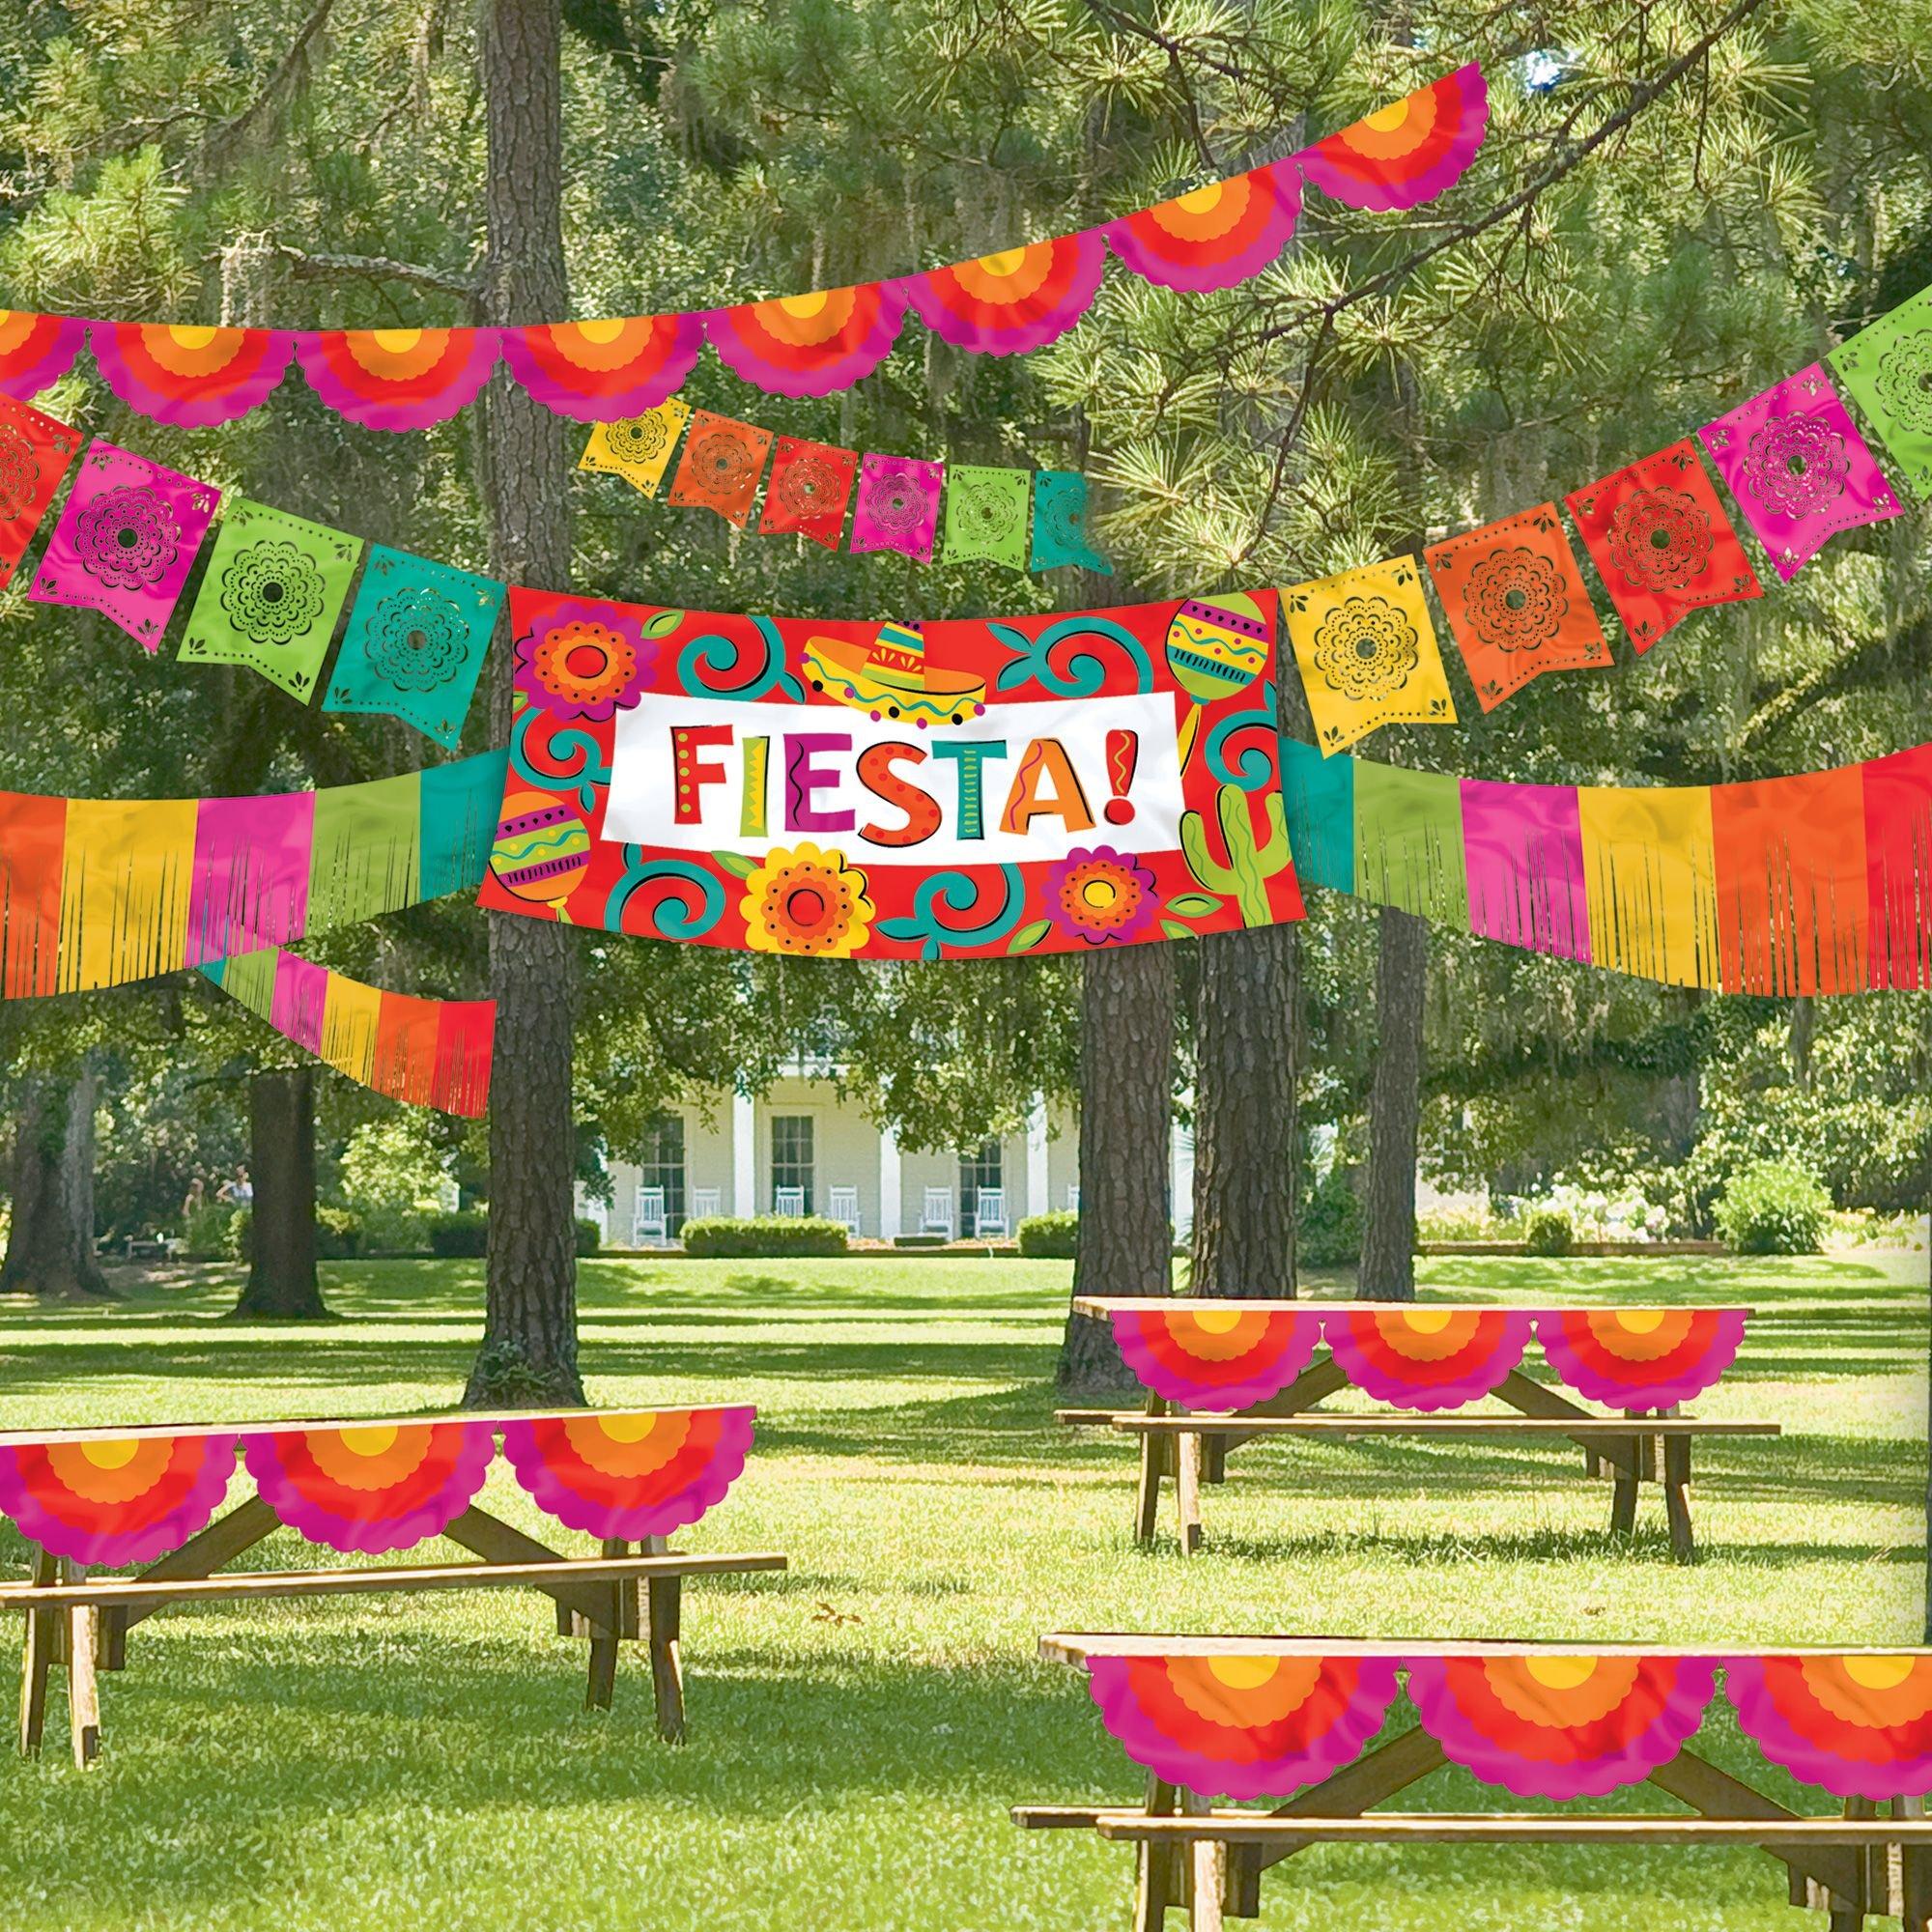 Mexican Fiesta Party Ideas  Fiesta Party Theme Decorations